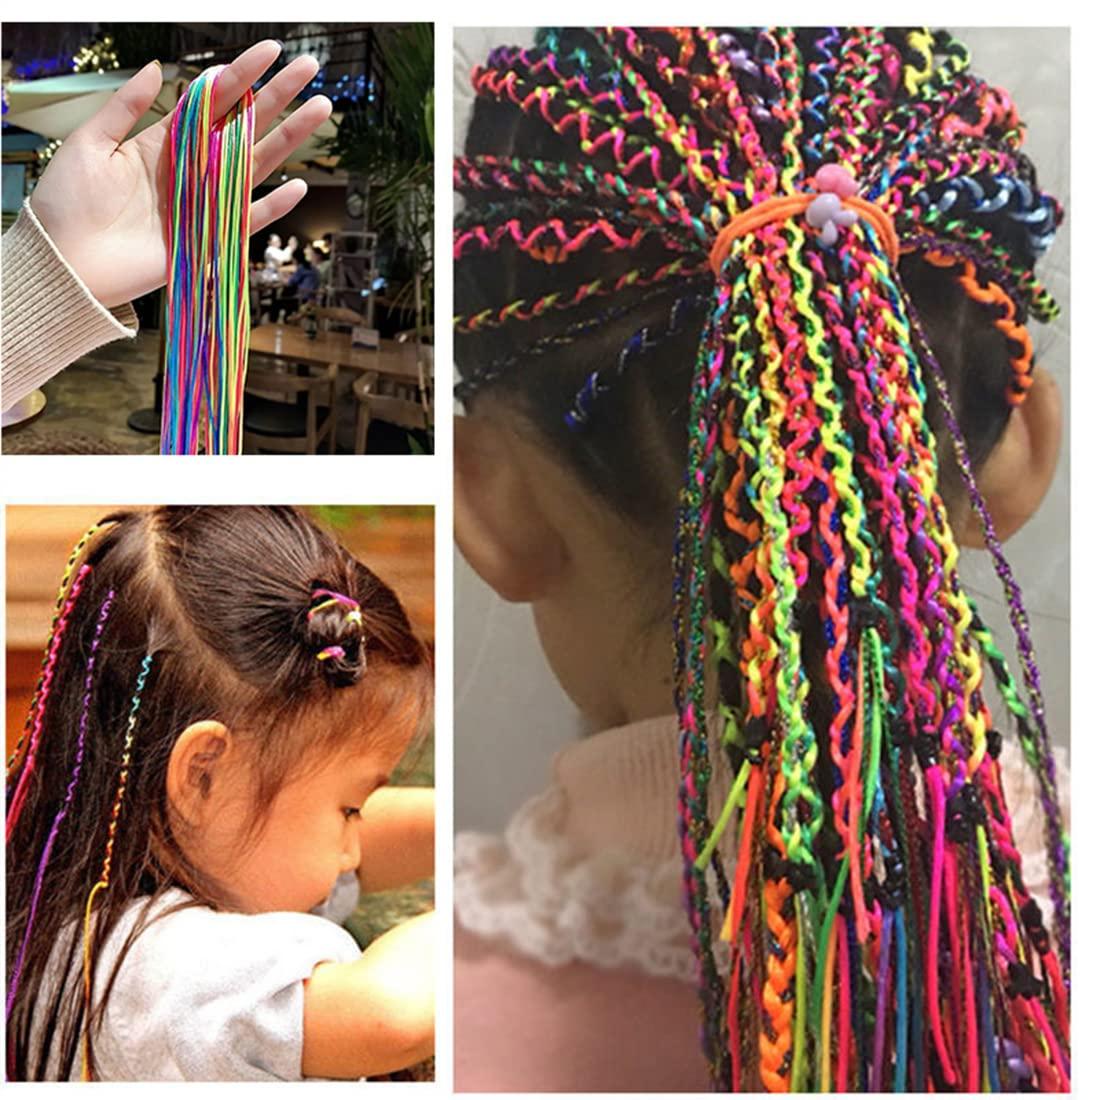 50pcs Hair Braids Assorted Gradient Colorful Braided Hair Rope Band Set for Ponytail  braids Women Girl DIY Braid Hair Styling Accessories Wraps